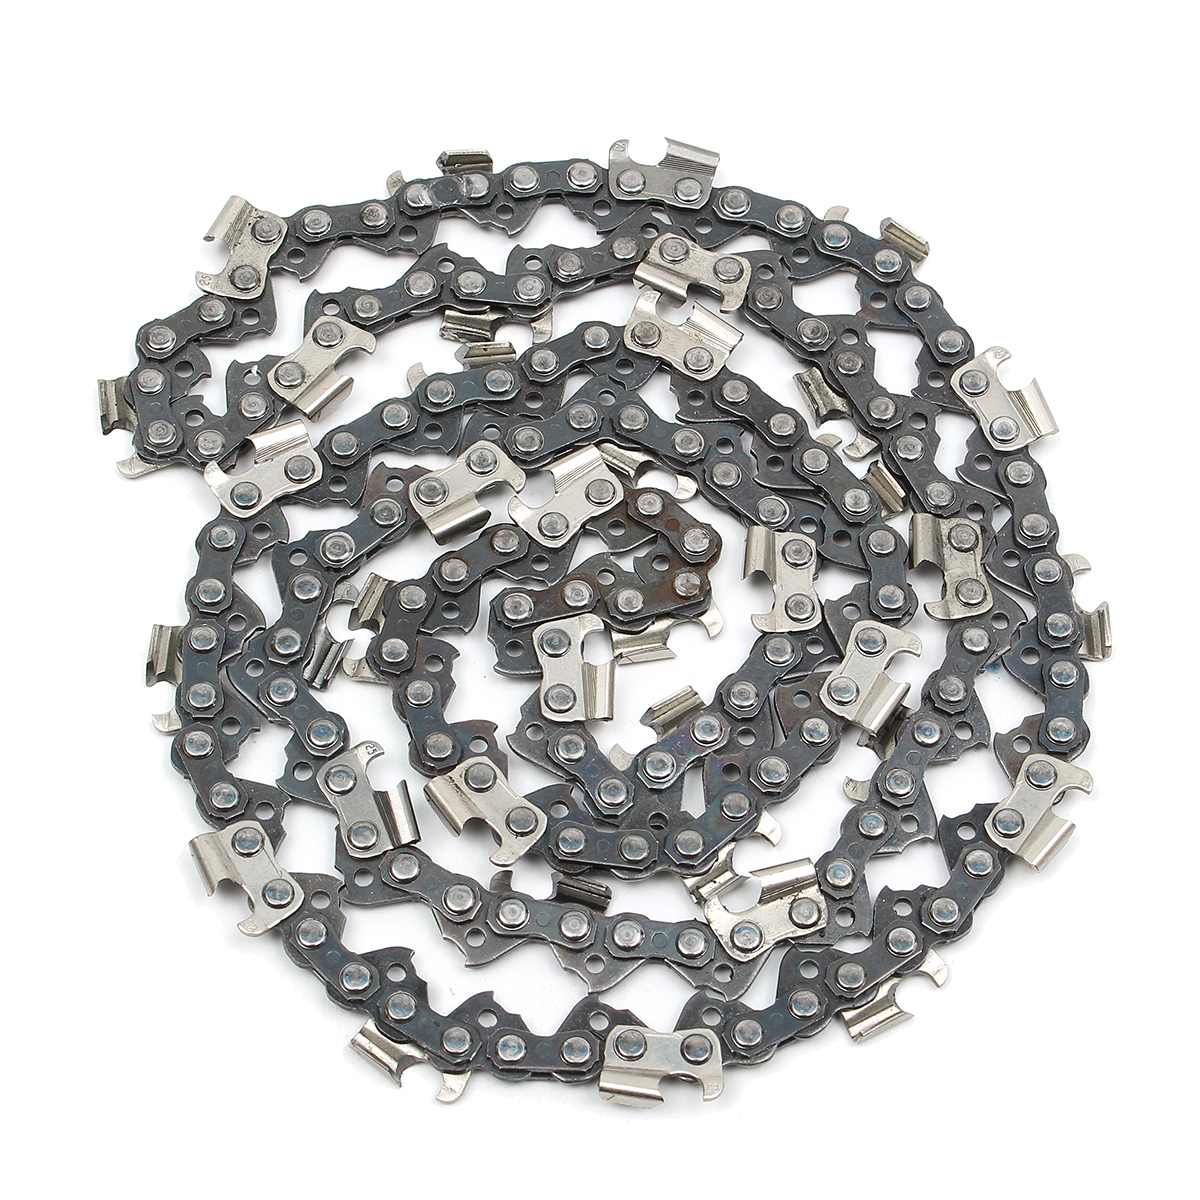 2pcs 20 Inch 76 Drive Link Chainsaw Saw Chain Blade Wood Cutting Chainsaw Parts Chainsaw Saw Mill Chain For Cutting Lumbers